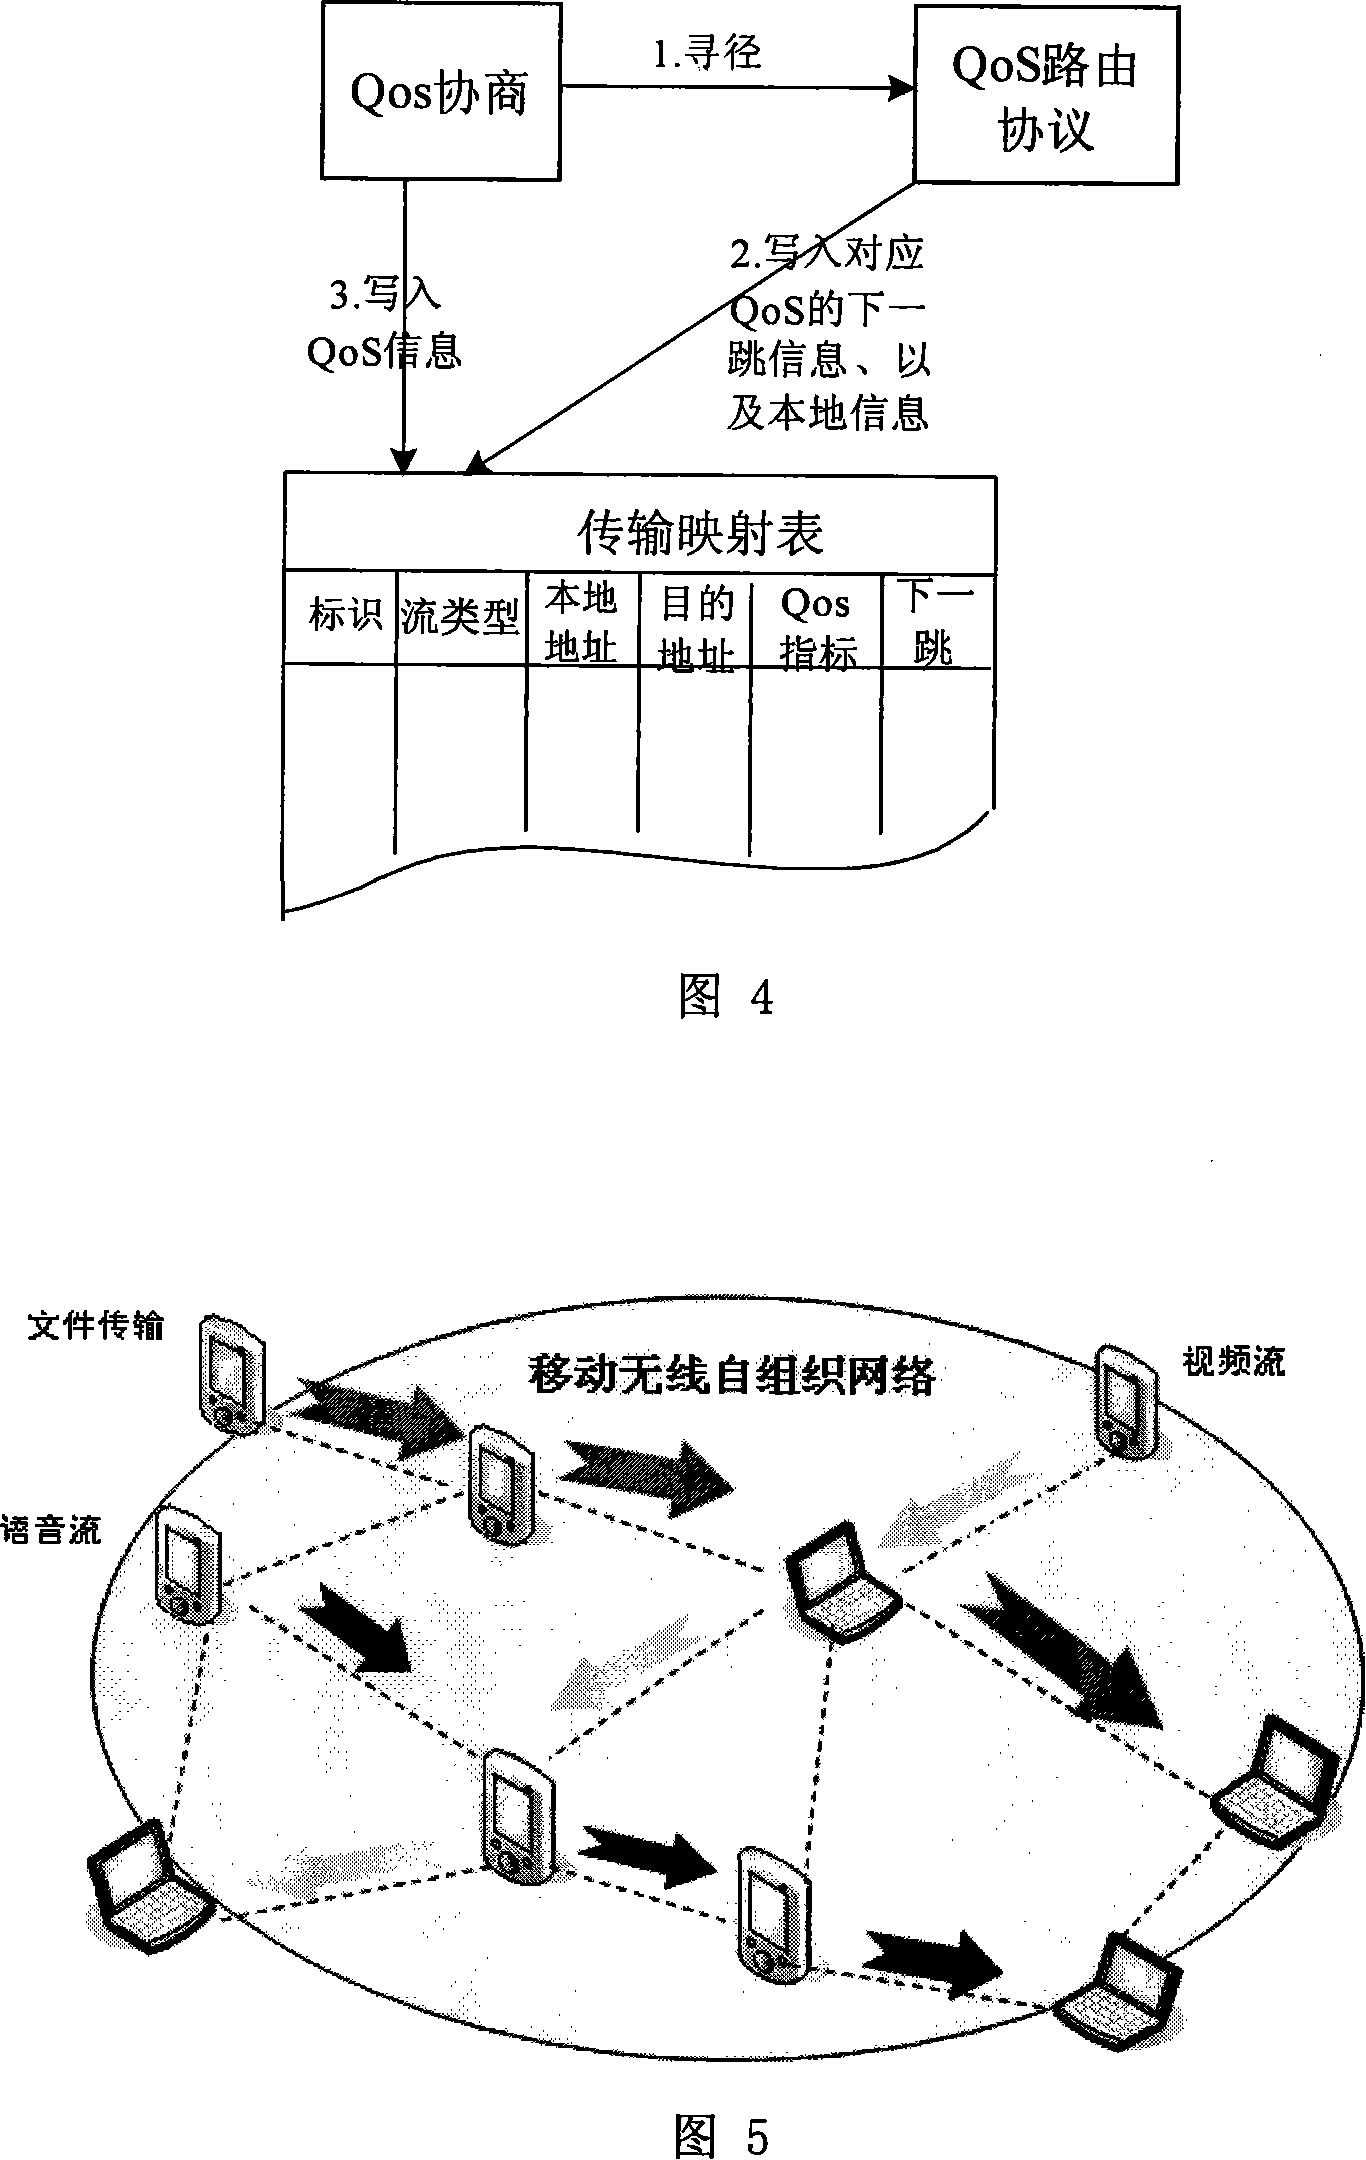 Routing device and method of wireless mobile self-organizing network of dynamic assurance service quality